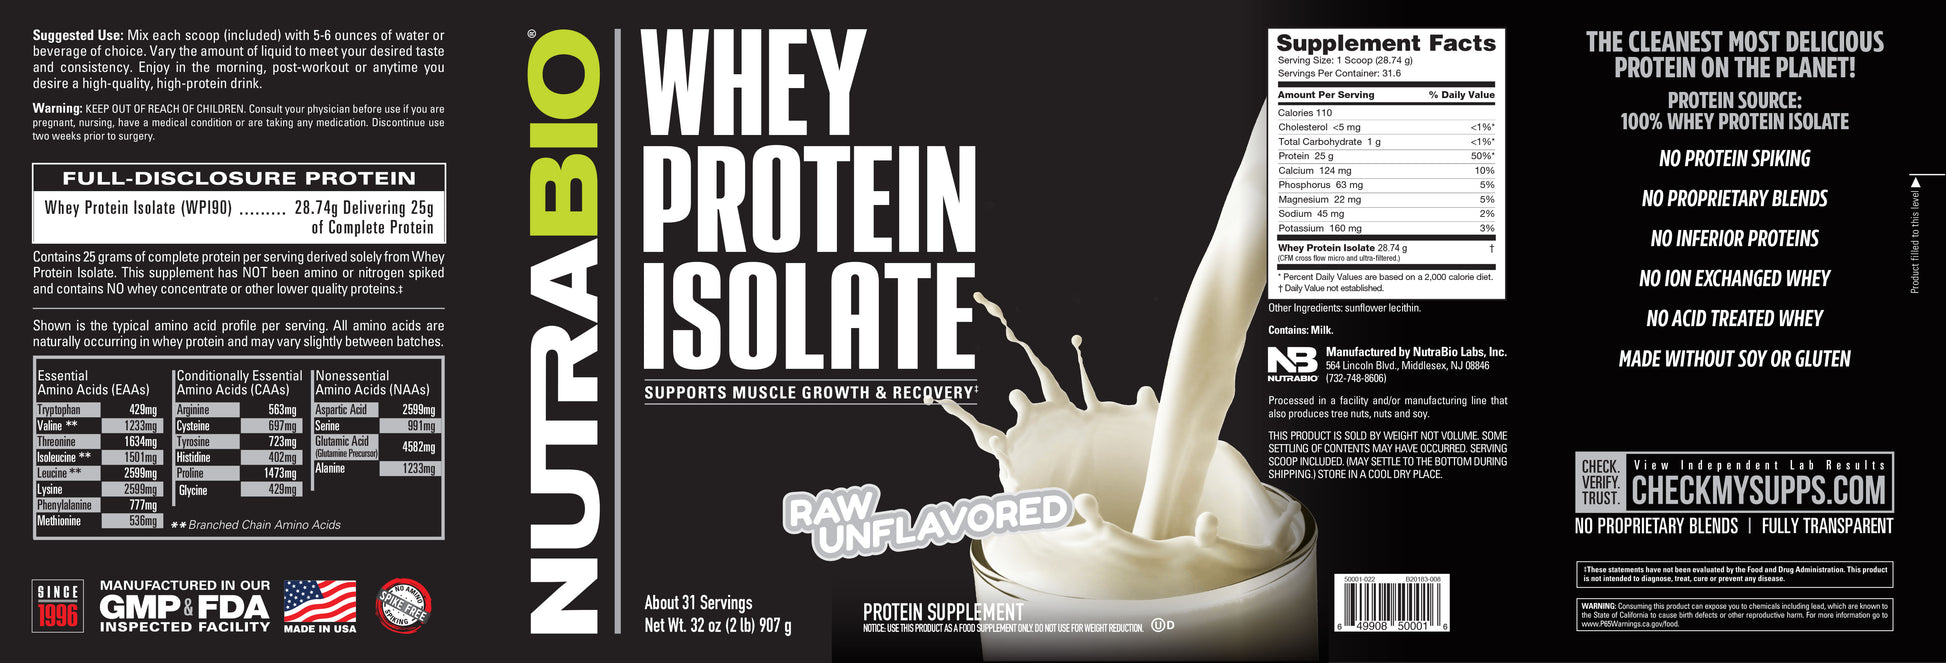 Raw Unflavored 2lb Whey Protein Isolate